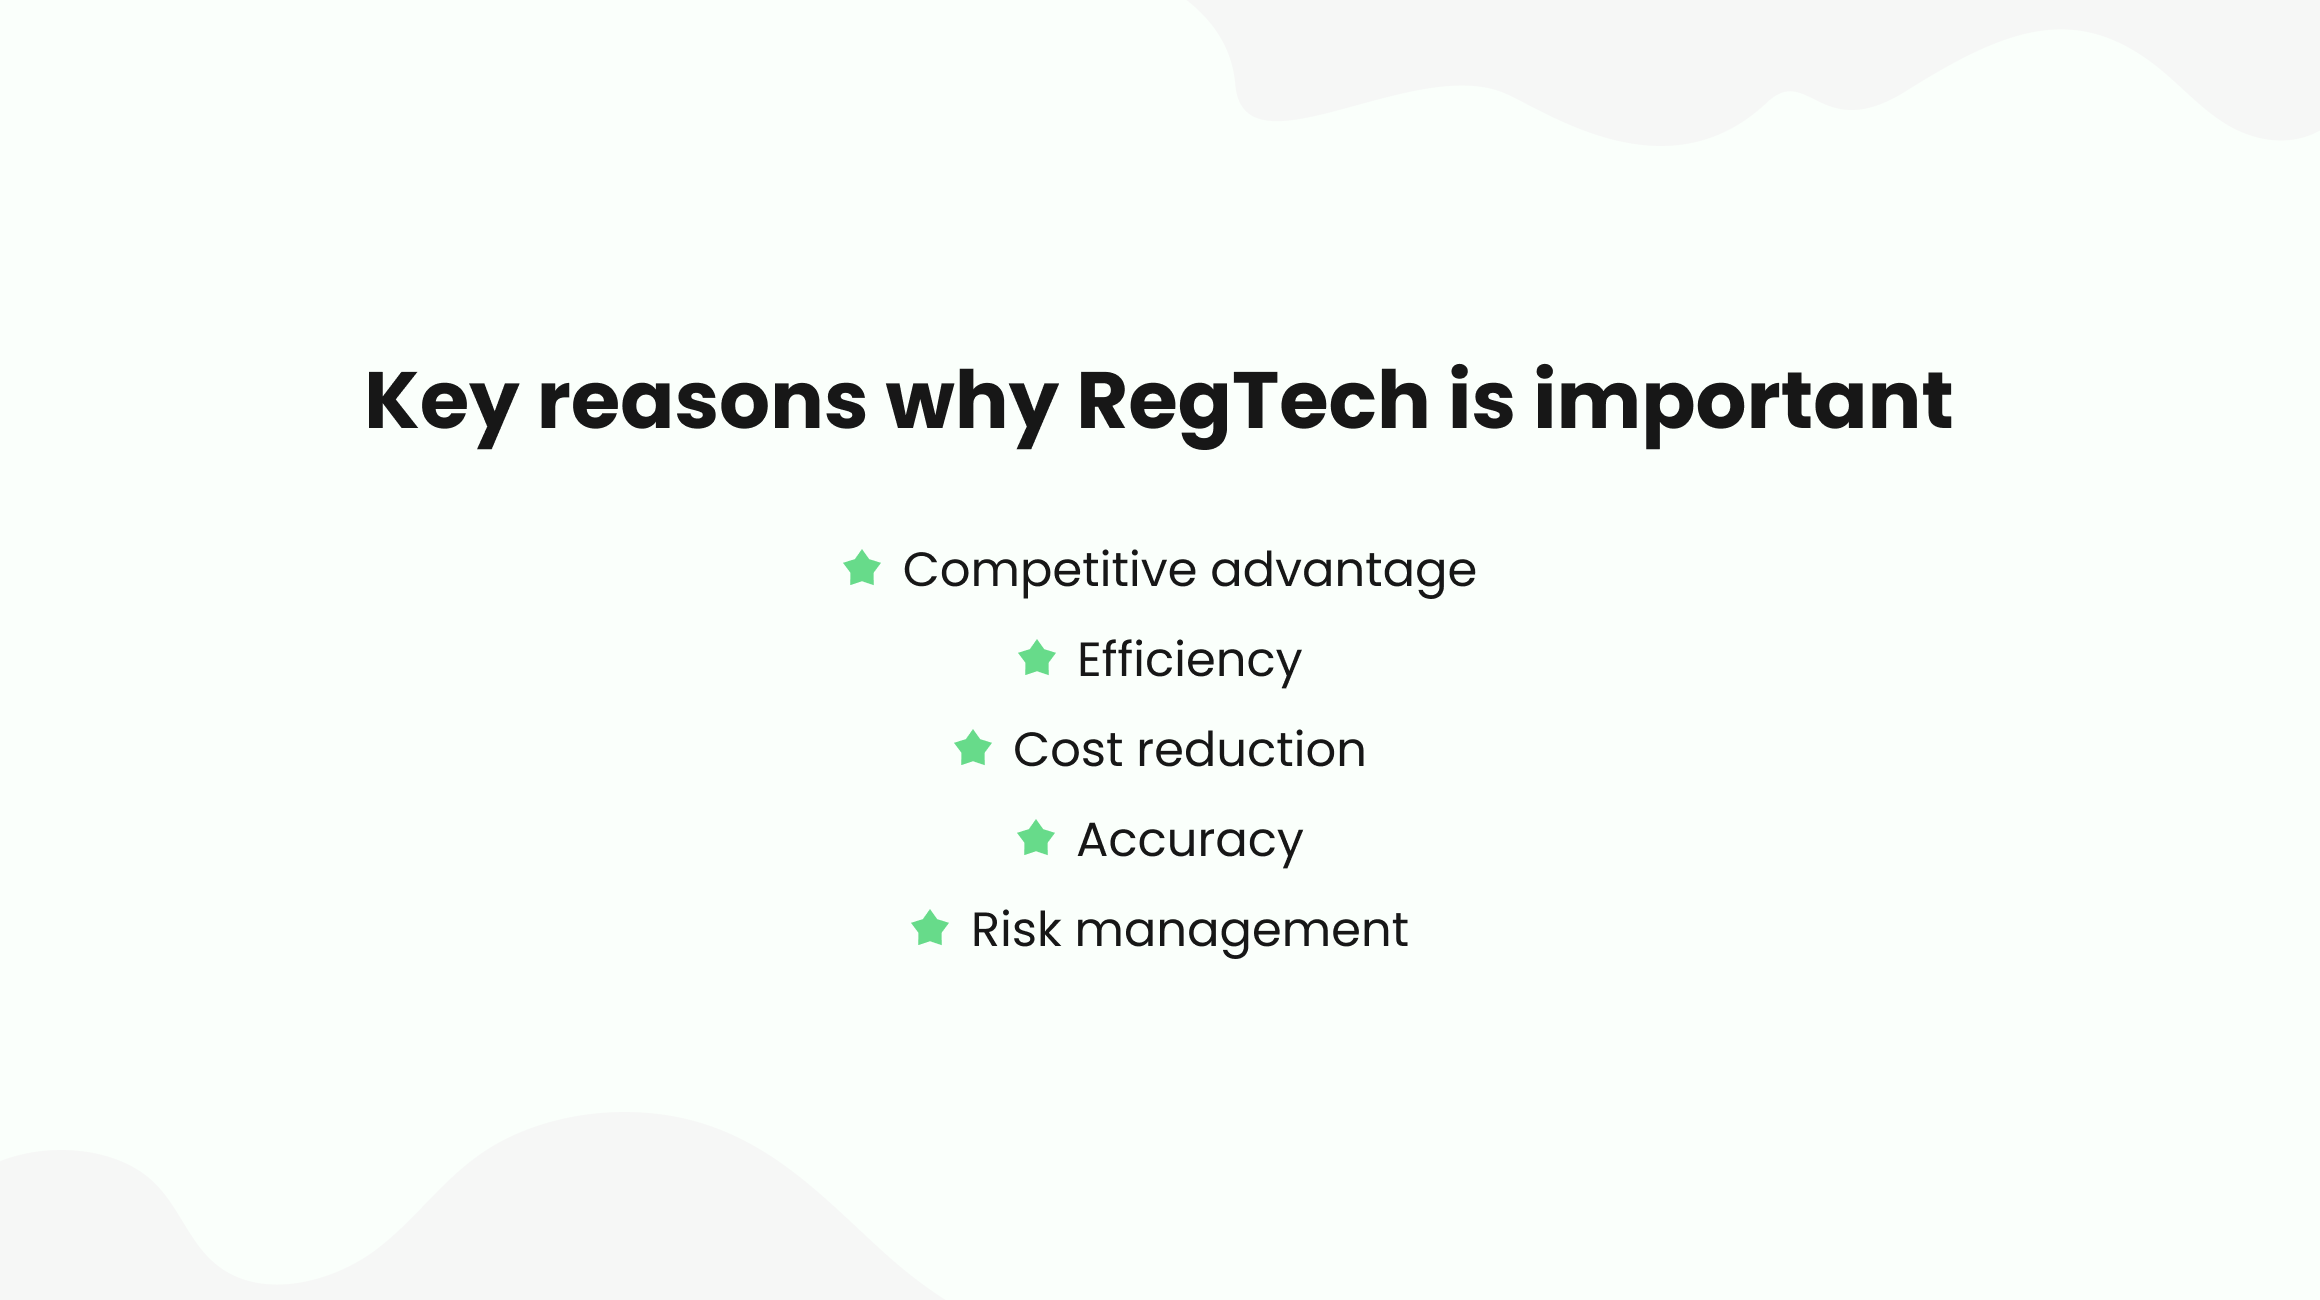 The importance of RegTech solutions for banks